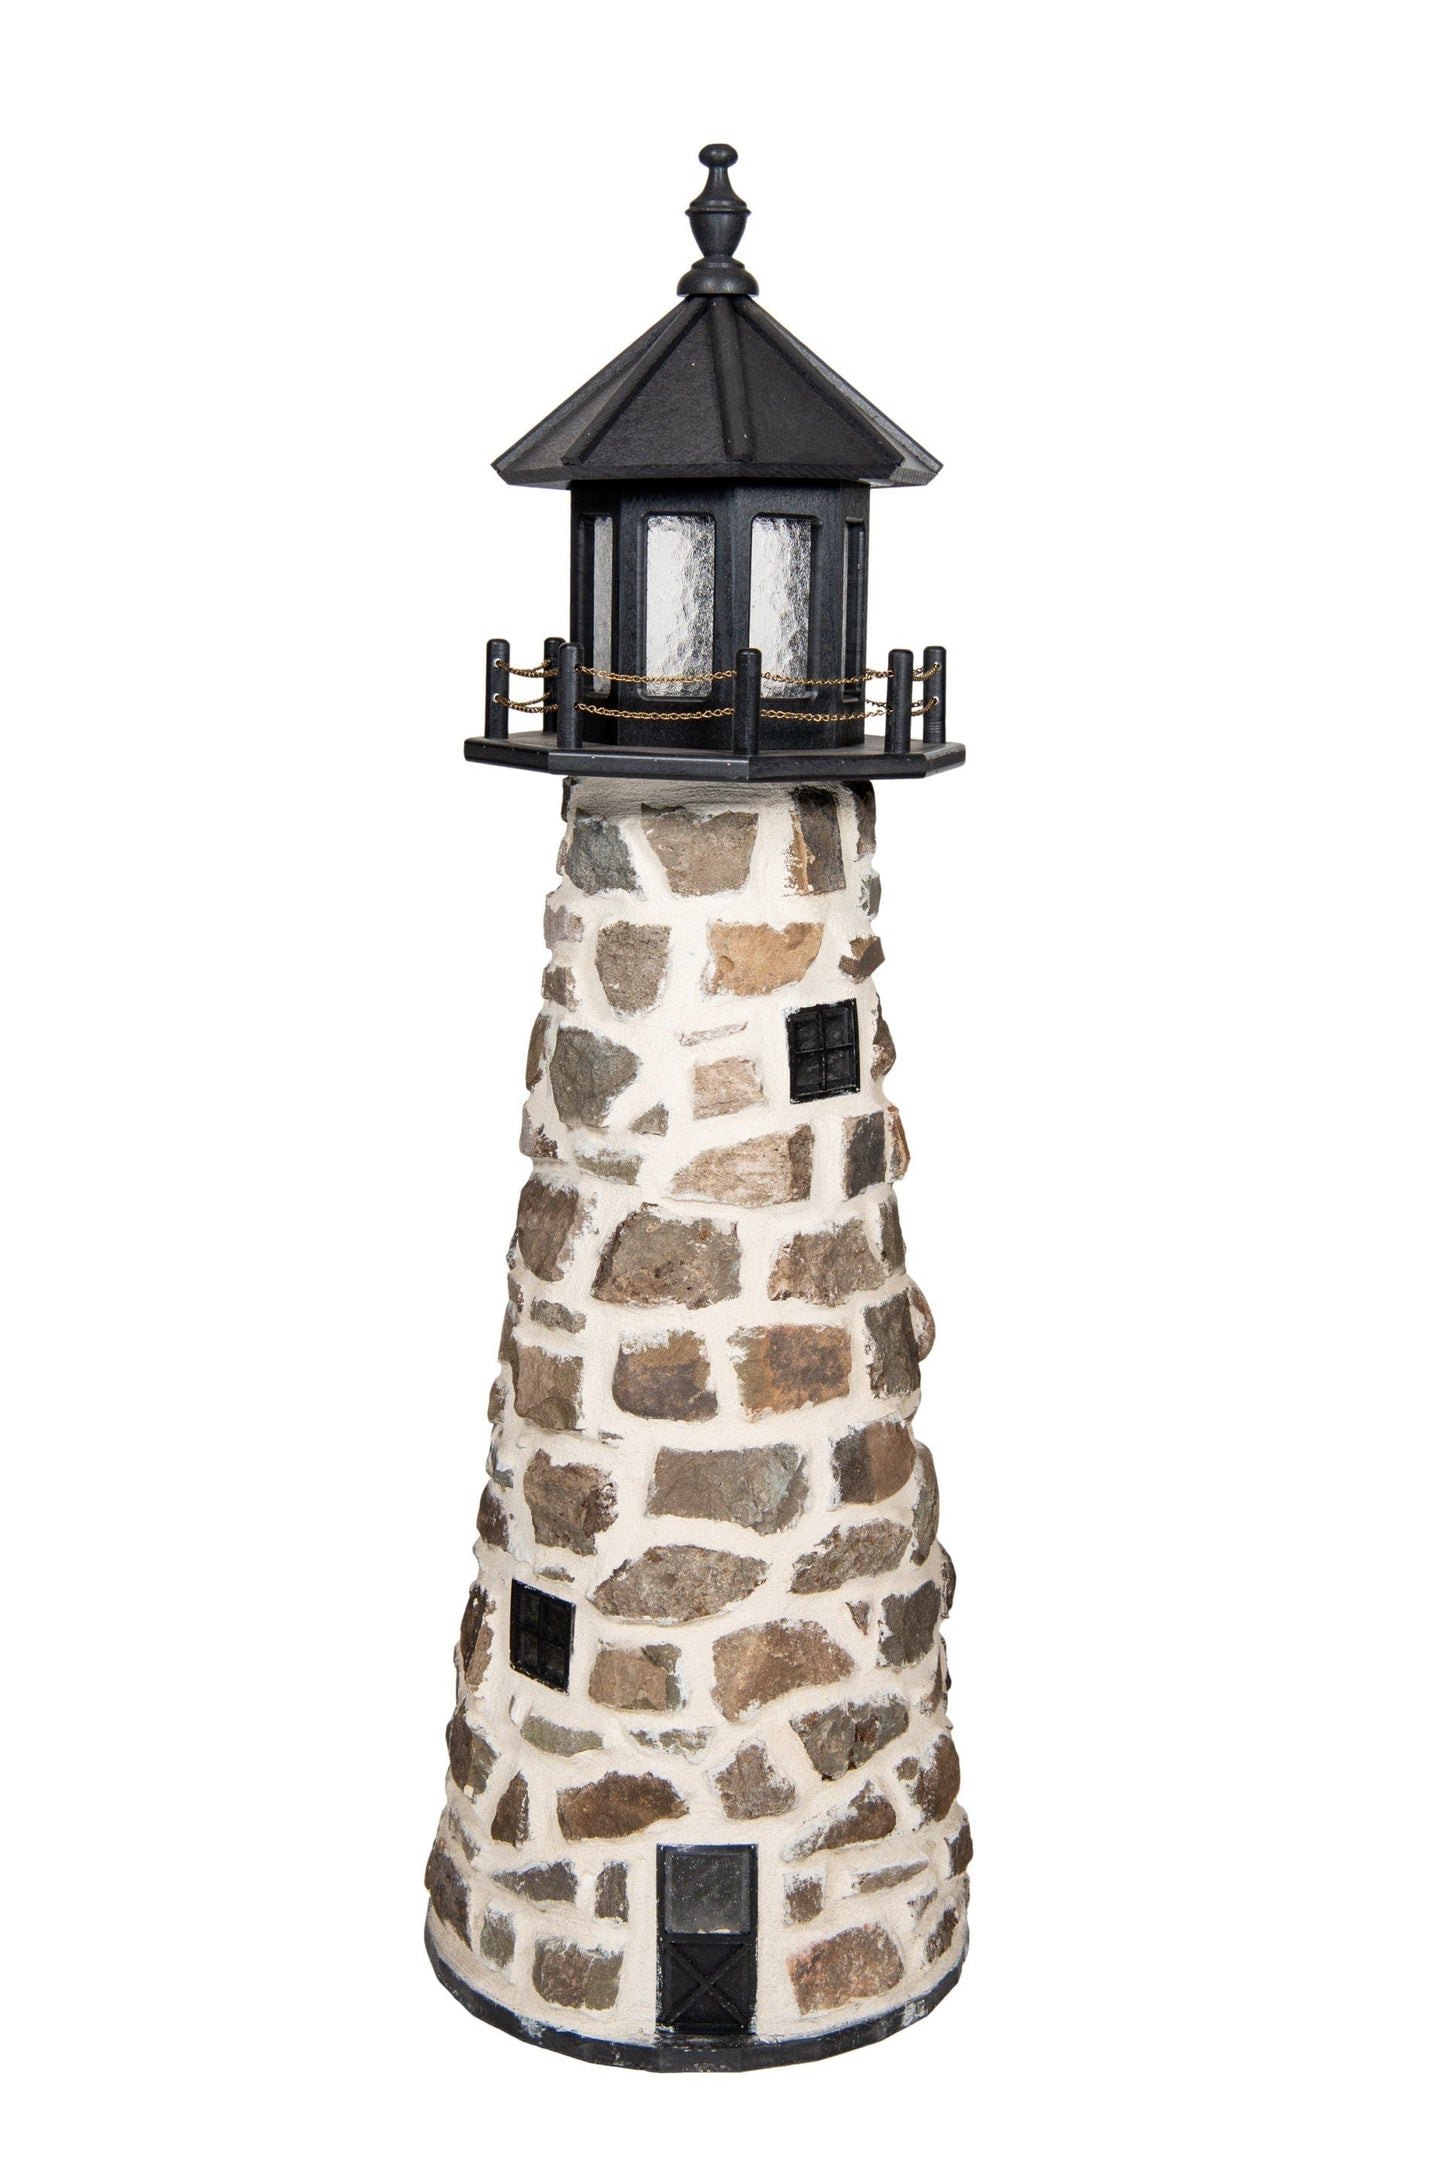 Beaver Dam Woodworks 12 FT Stone Lighthouse Cherrywood top